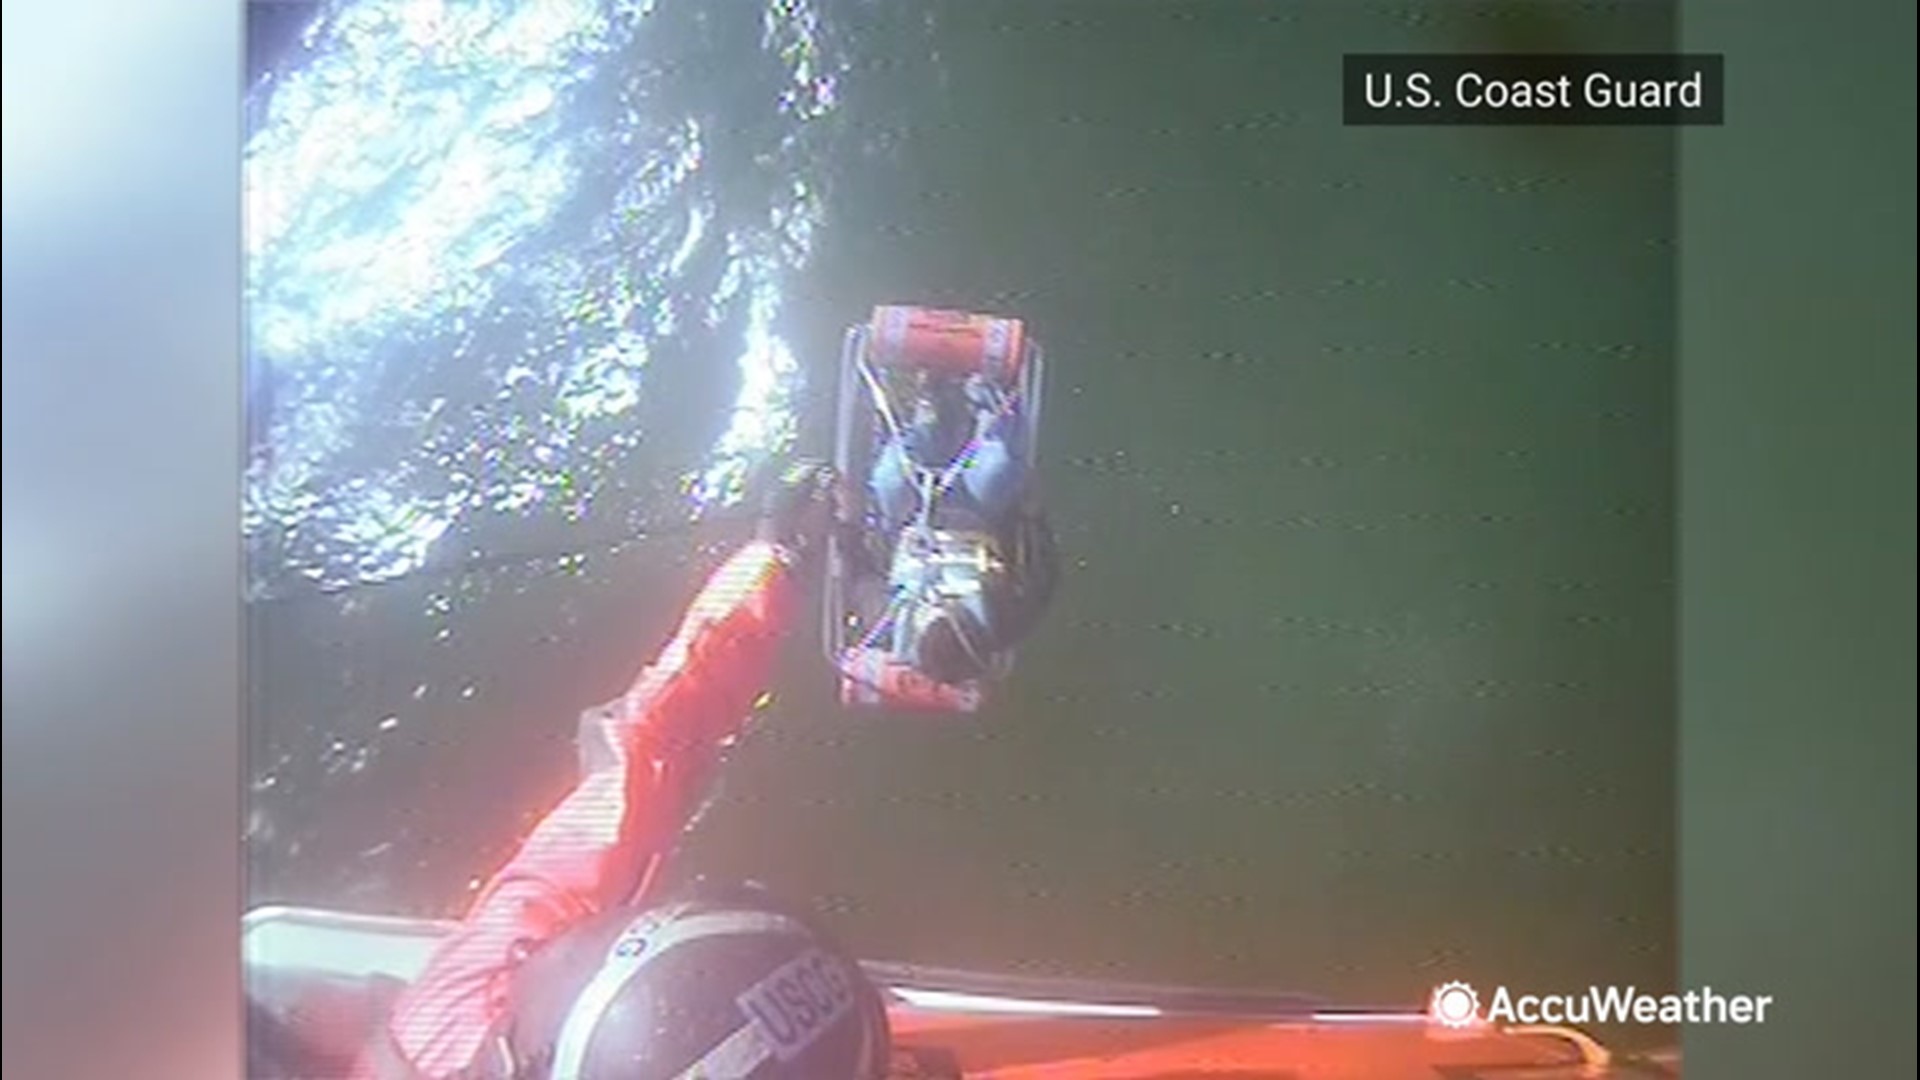 The U.S. Coast Guard rescued three boaters off the coast of Fire Island, New York, on Oct. 15. Inclement weather played a part in the boaters getting stuck at sea, requiring rescue.